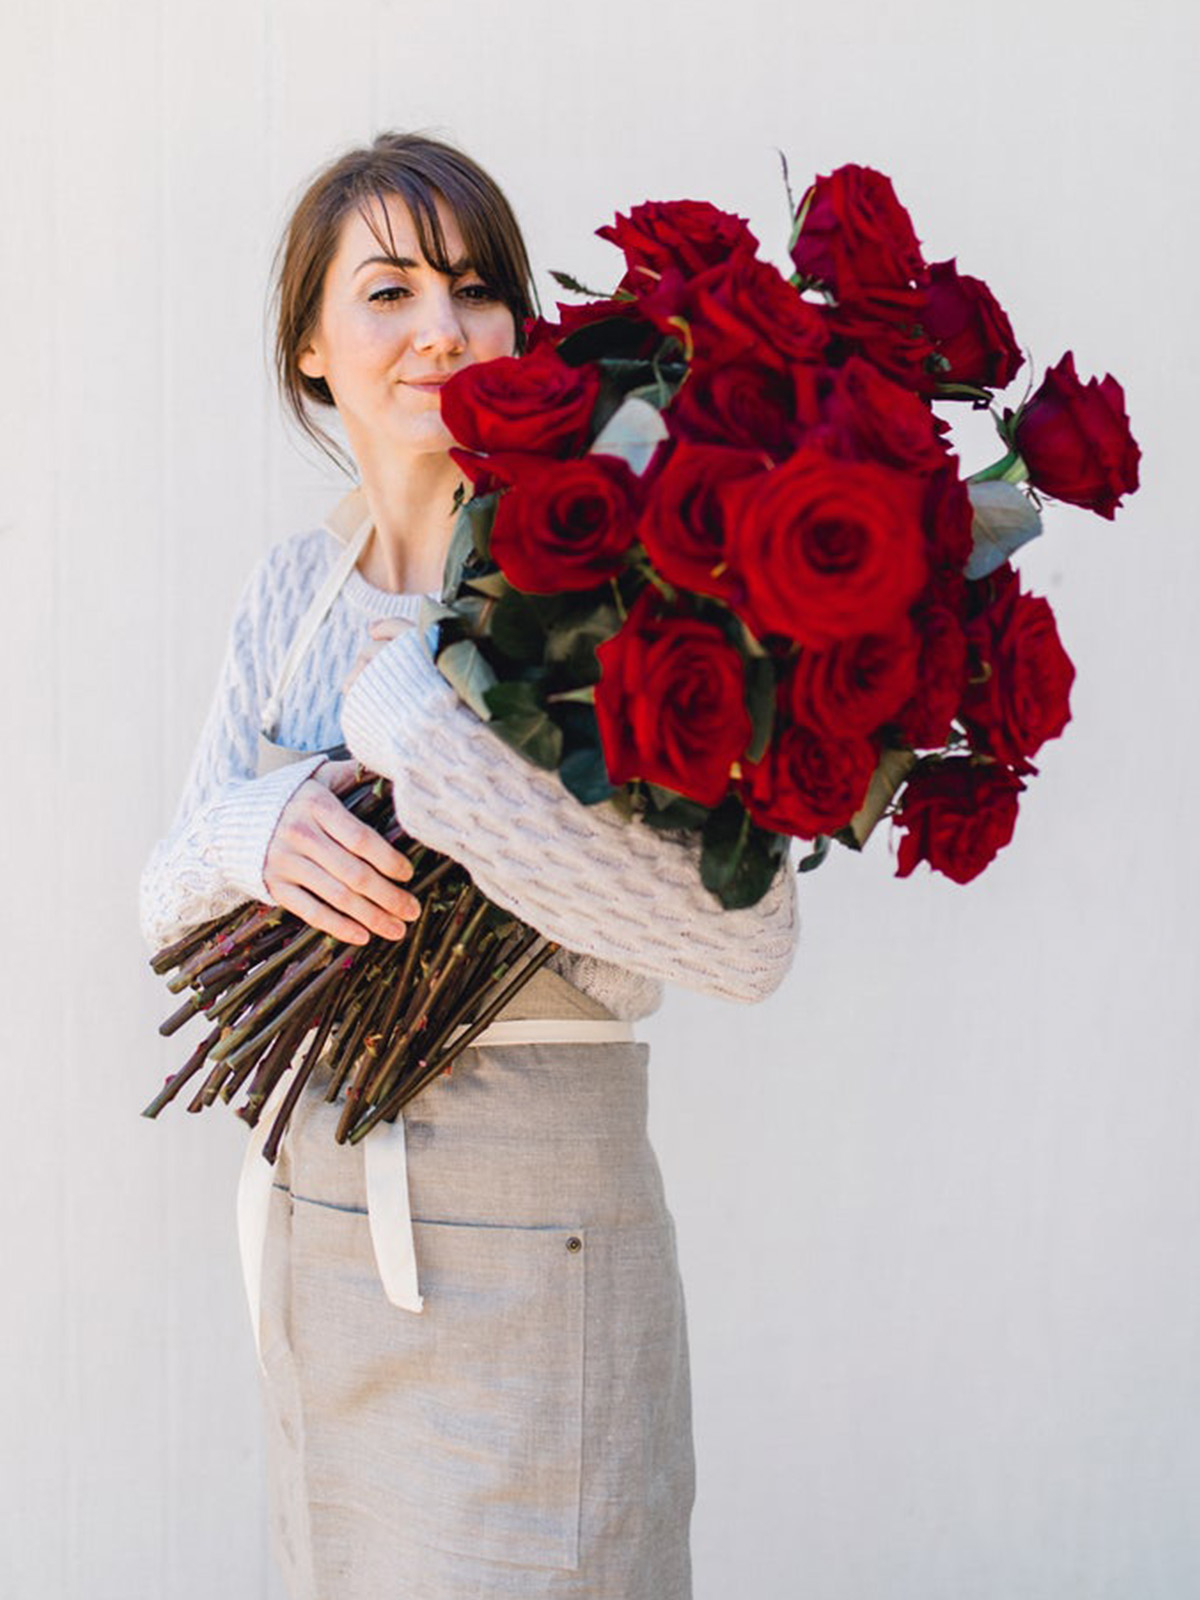 luxury red roses with girl smelling